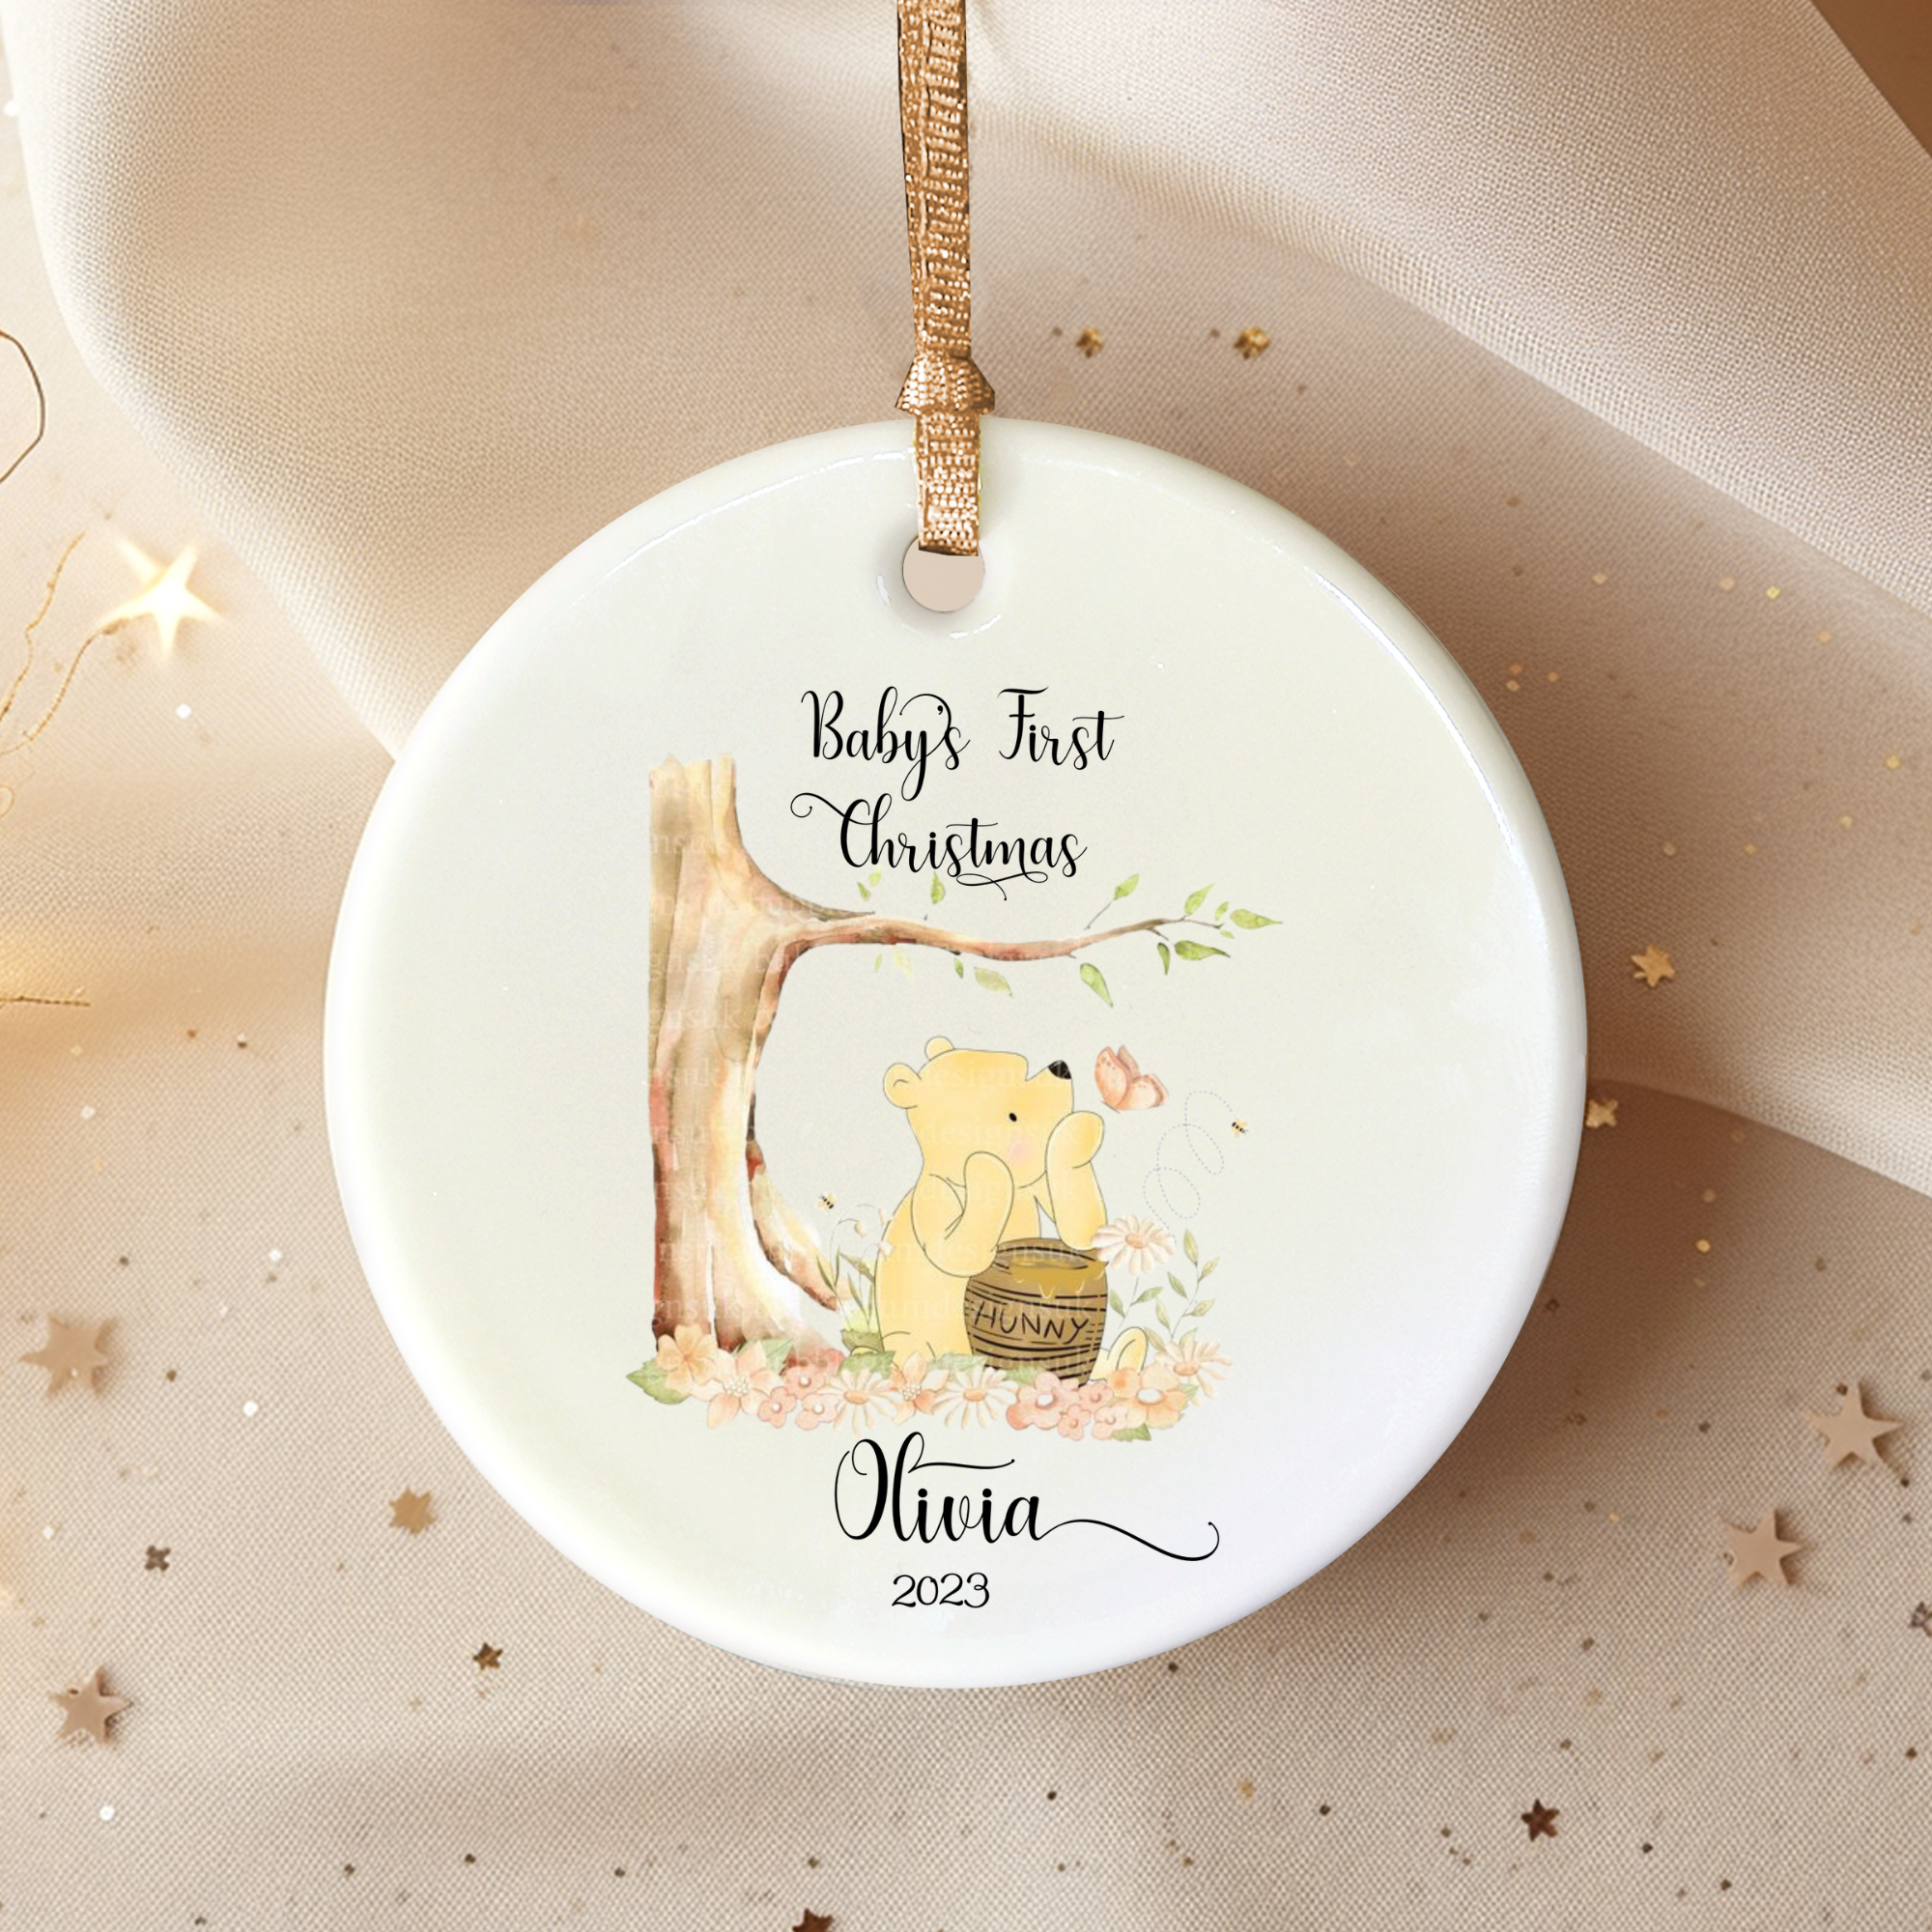 Baby's First Christmas Ornament  - Personalized Ornament